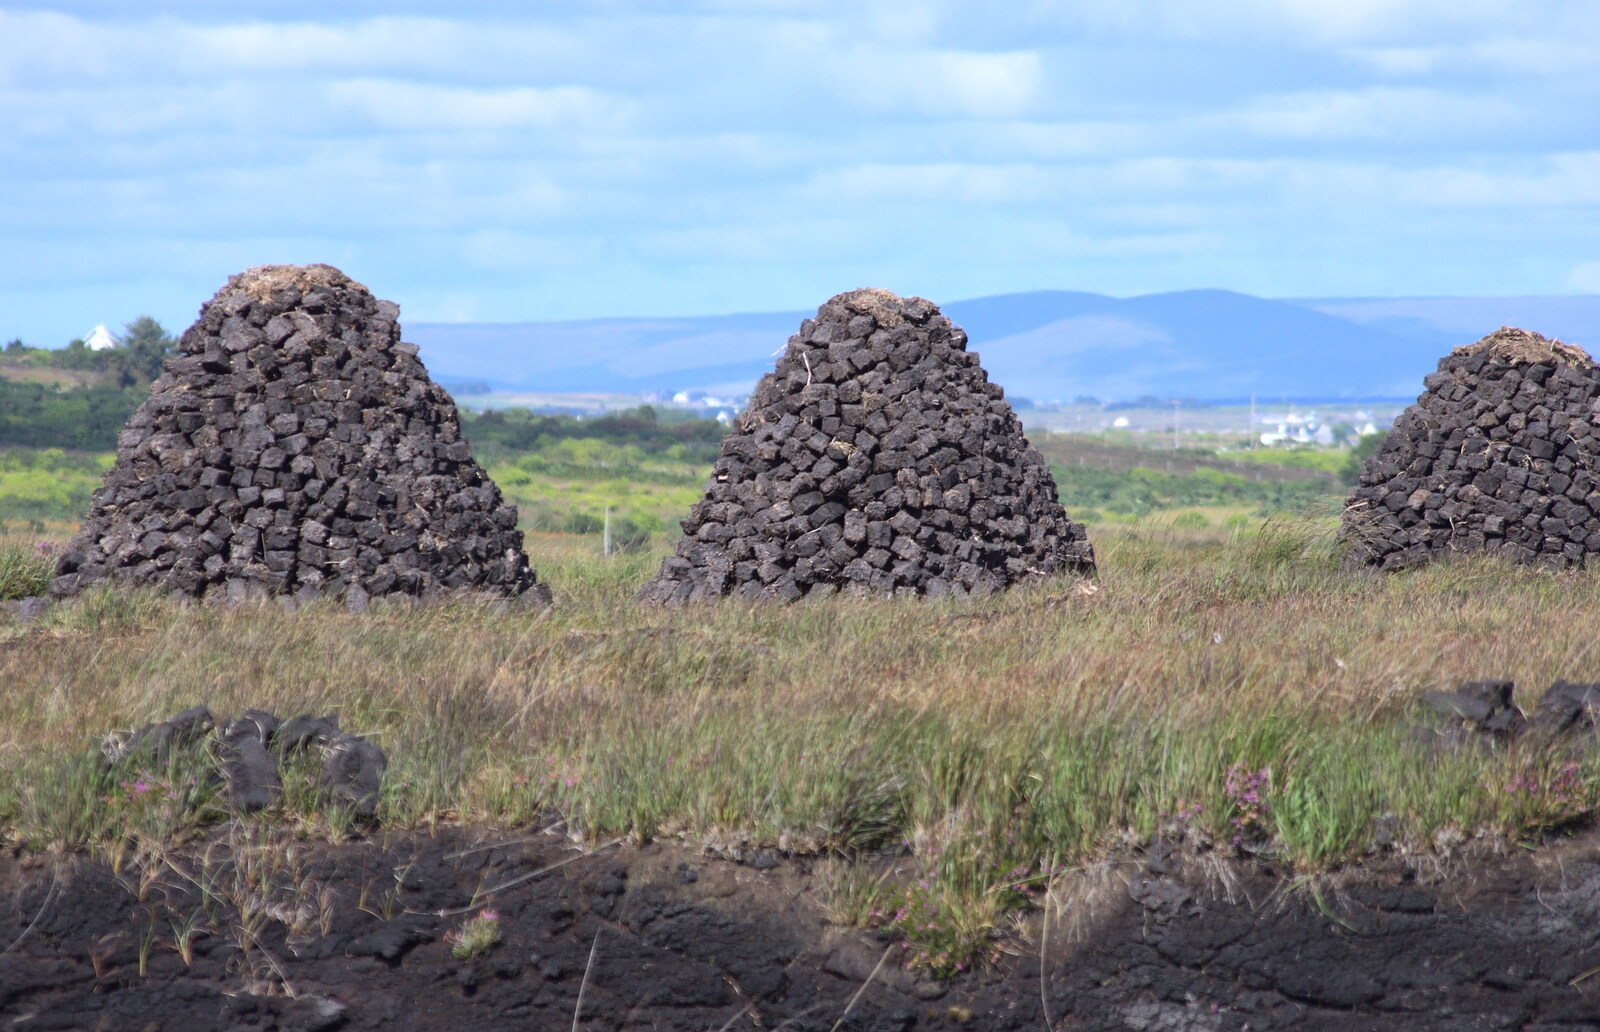 Three mounds of peat briquettes from Surfing Achill Island, Oileán Acla, Maigh Eo, Ireland - 8th August 2017